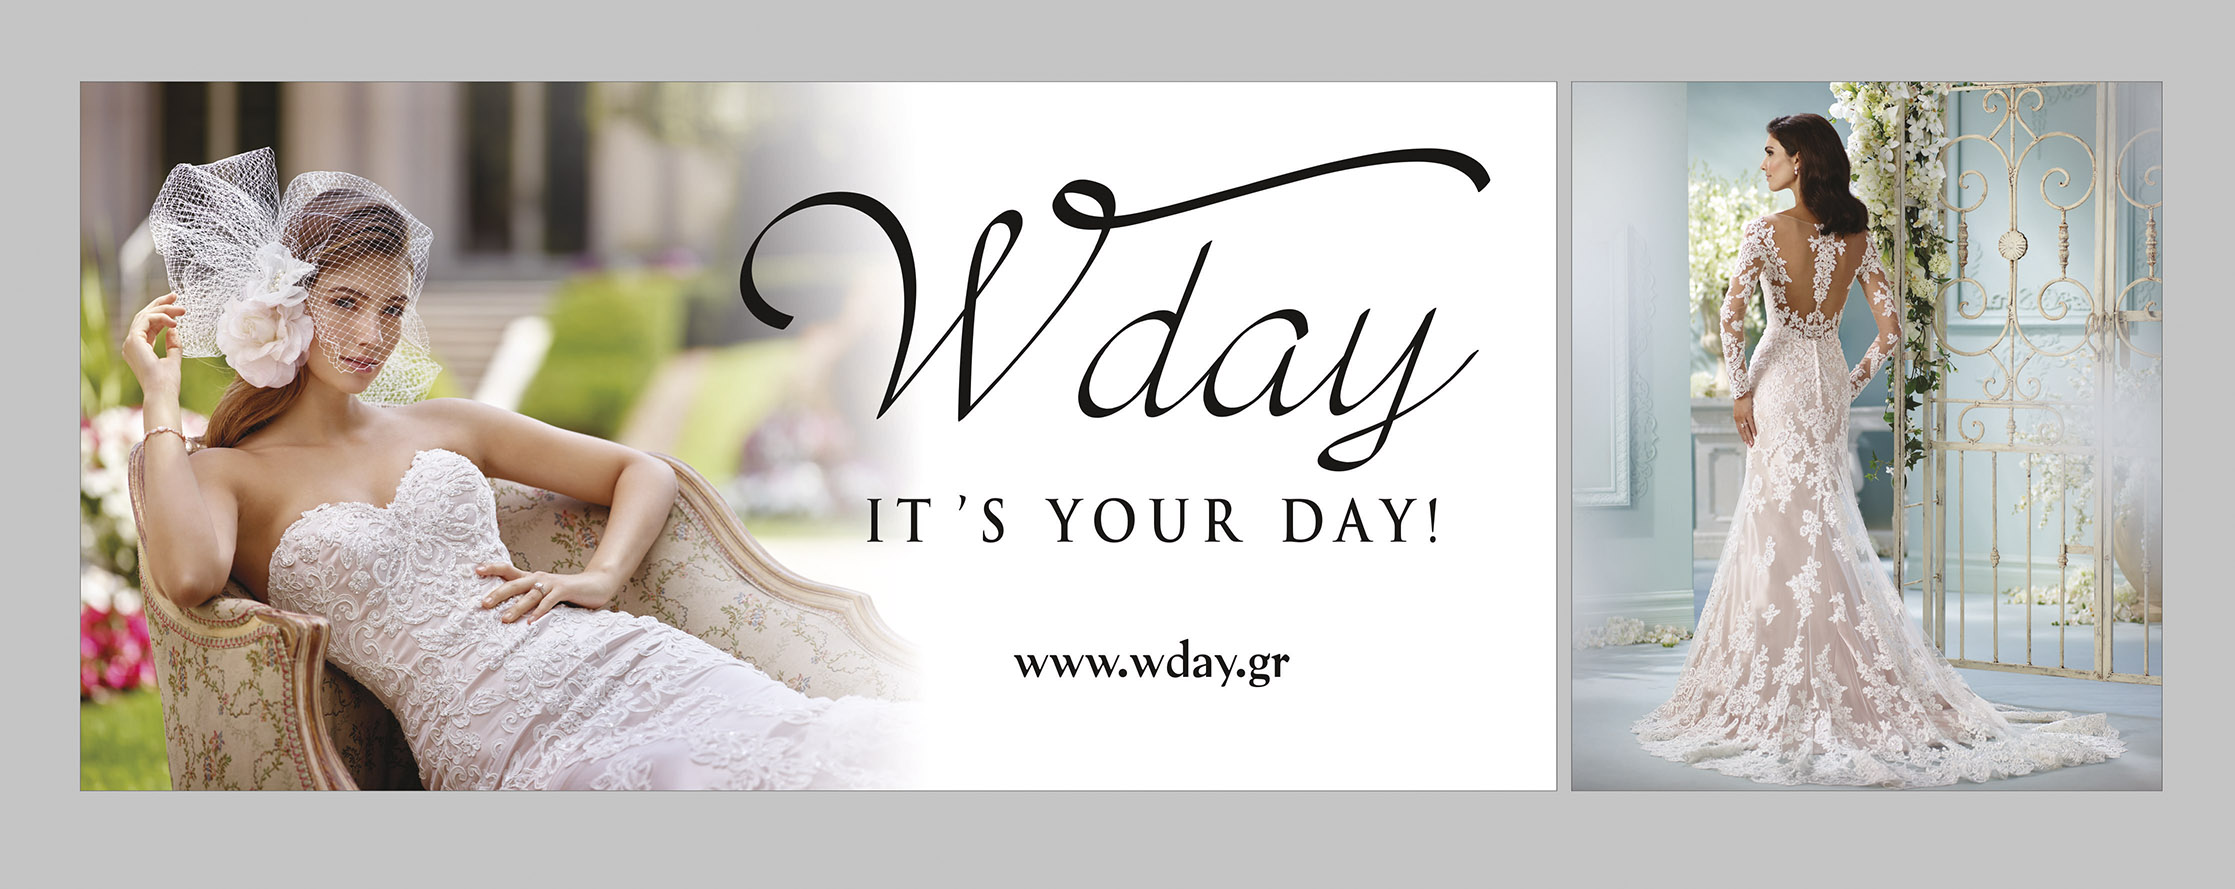 Wday - Ιt's your day - Χρύσα Μπαλαμώτη, Νυφικά